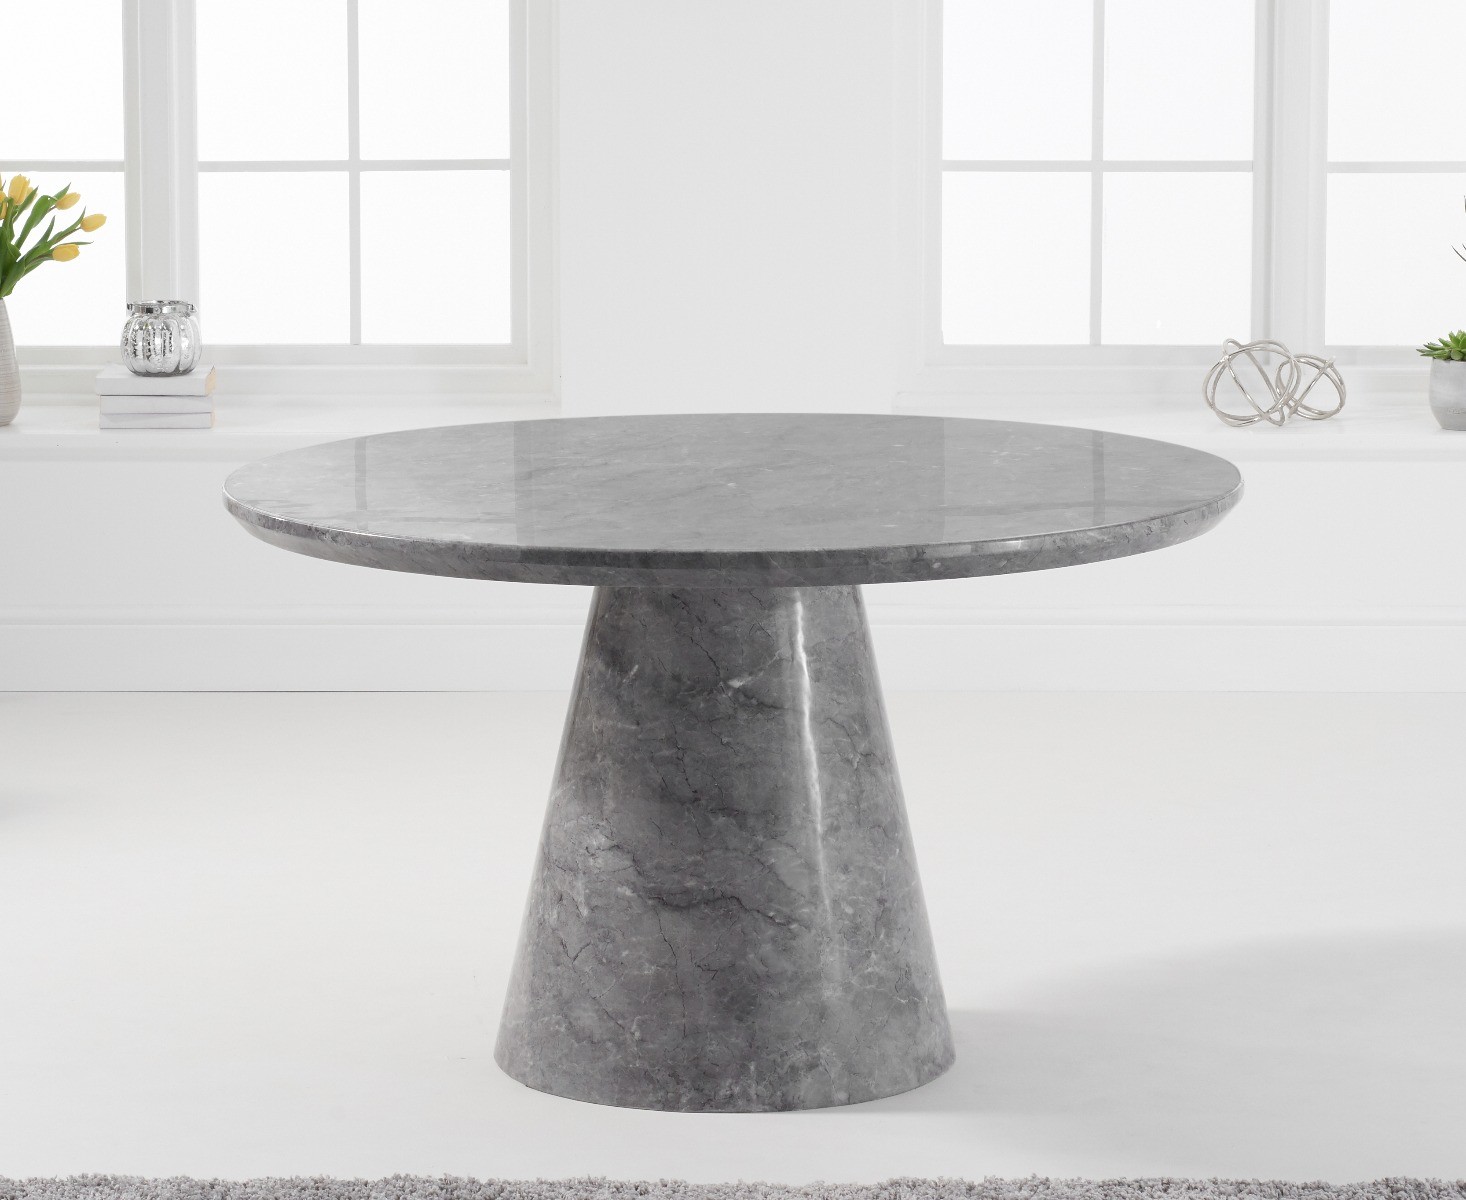 Photo 4 of Ravello 130cm round grey marble dining table with 4 grey lorenzo chairs